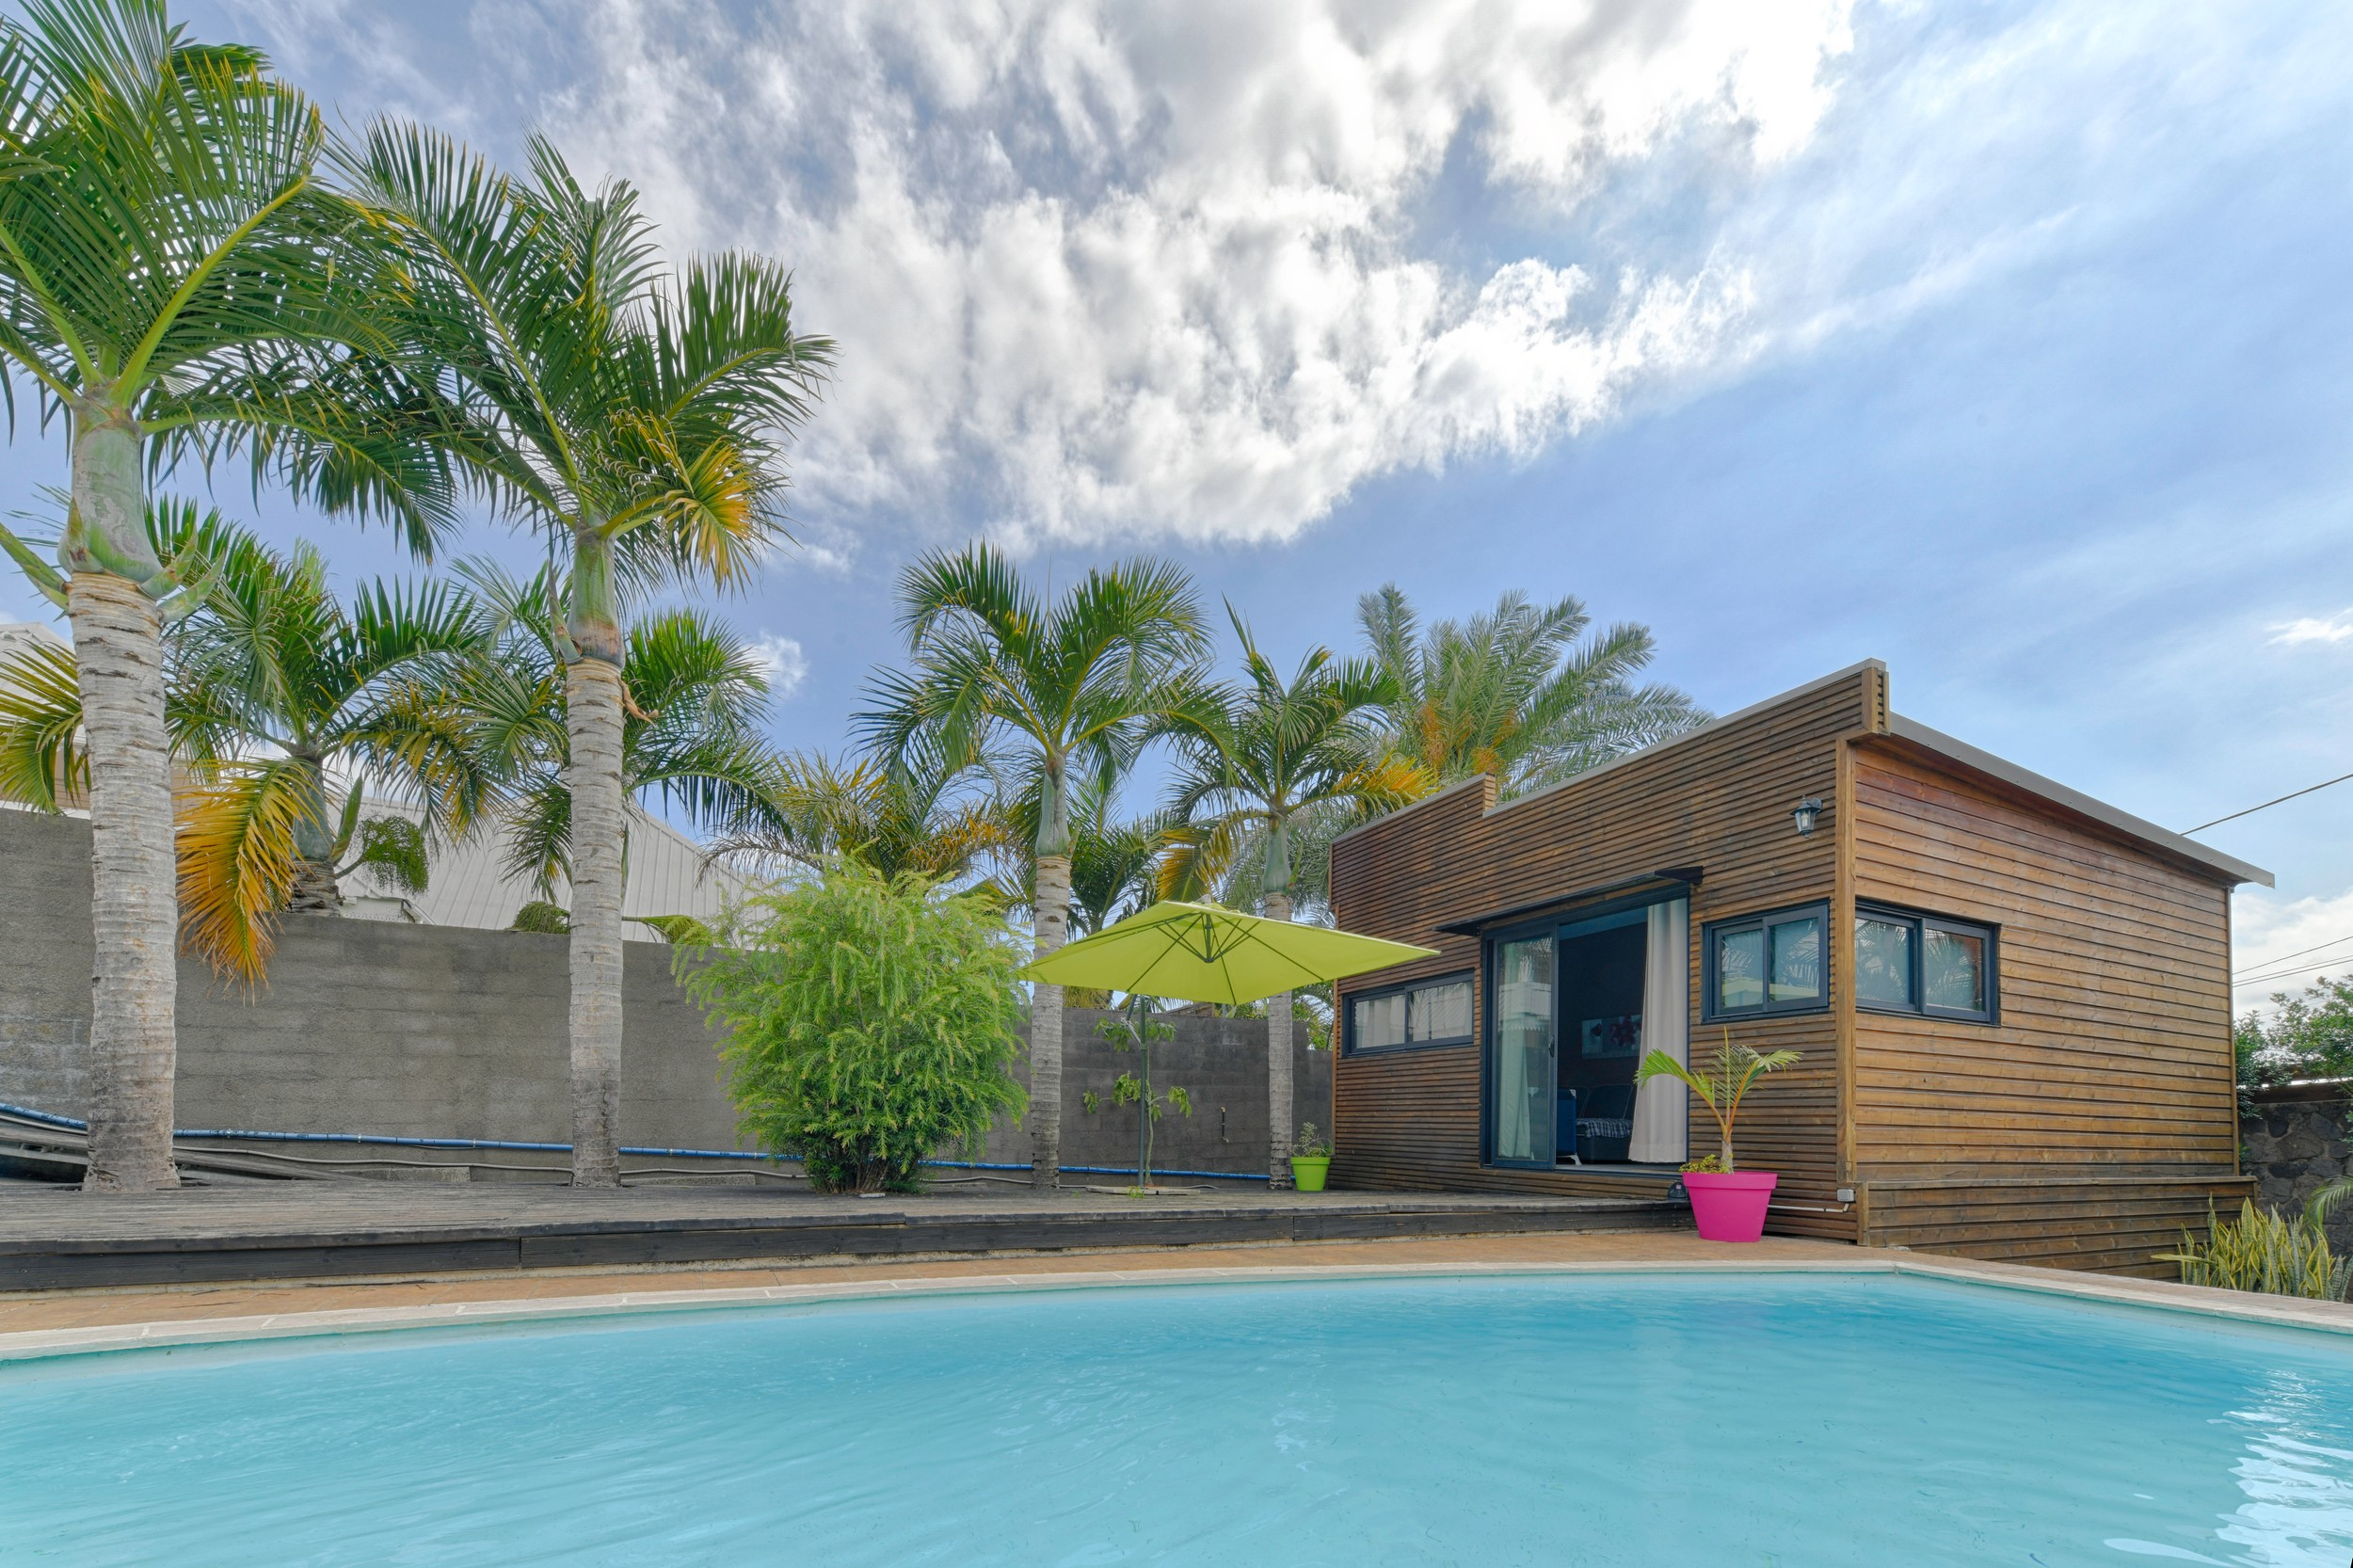 Reunion Island Holiday Rental In St Louis At 15Min From The Beach serapportantà Piscine St Louis